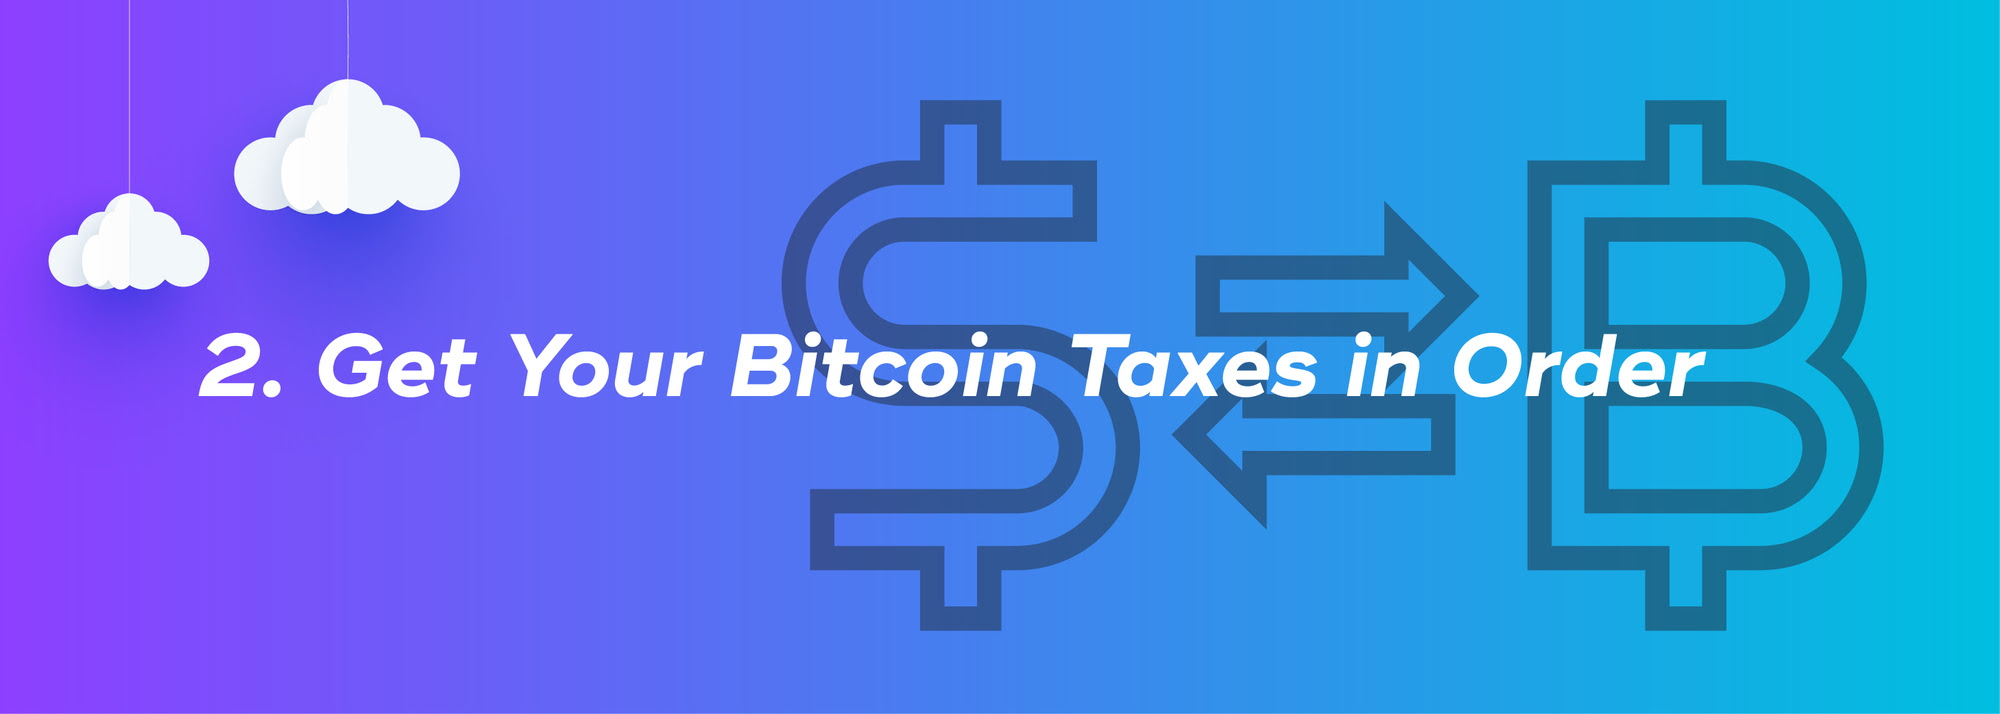 2. Get Your Bitcoin Taxes in Order